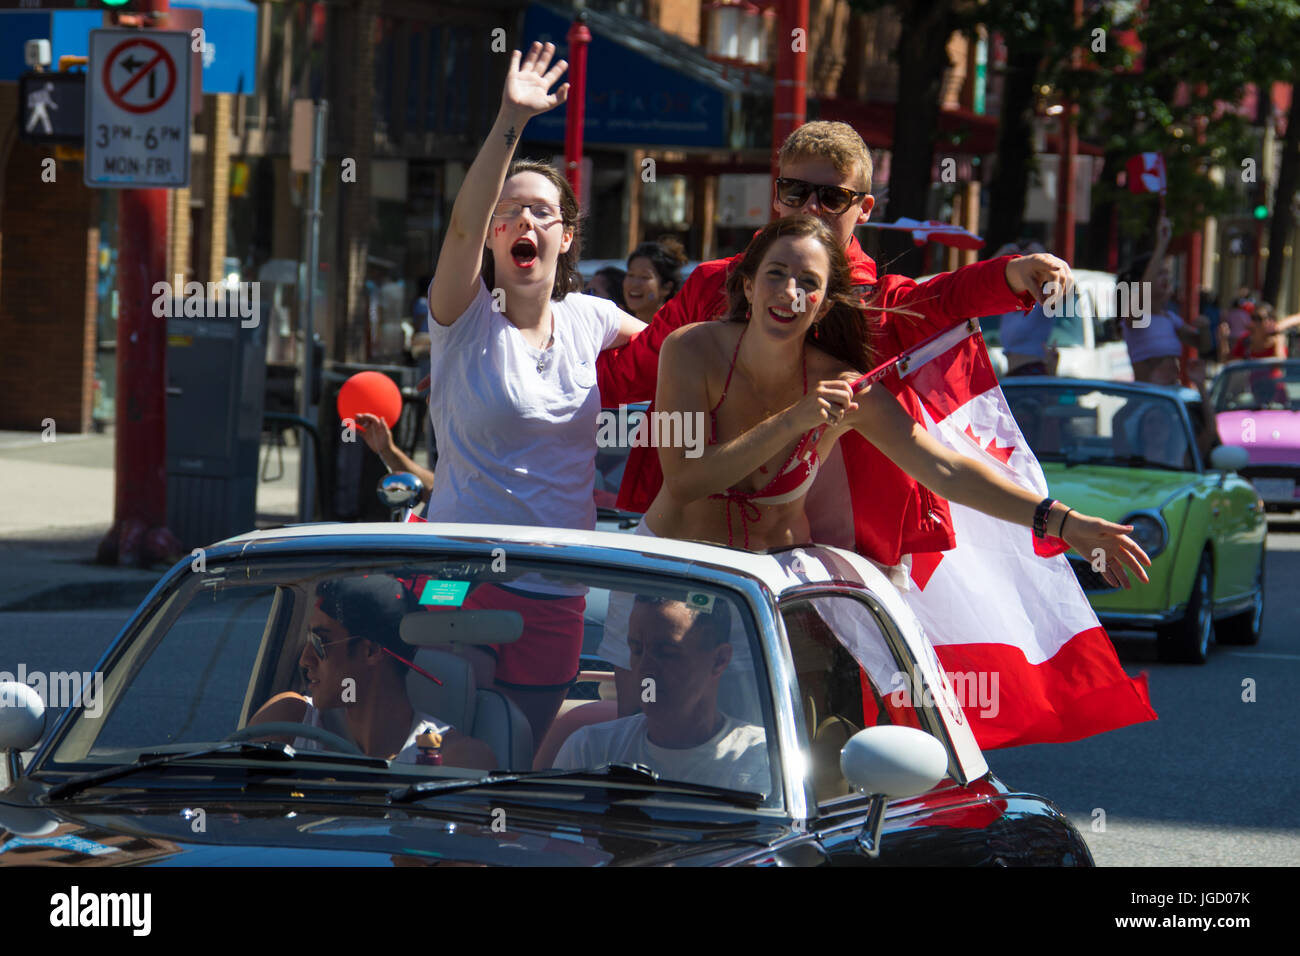 Young Canadians Celebrating Canada 150 Day in Vancouver, July, 1, 2017, Canada Day 150, Vancouver, Canada Stock Photo